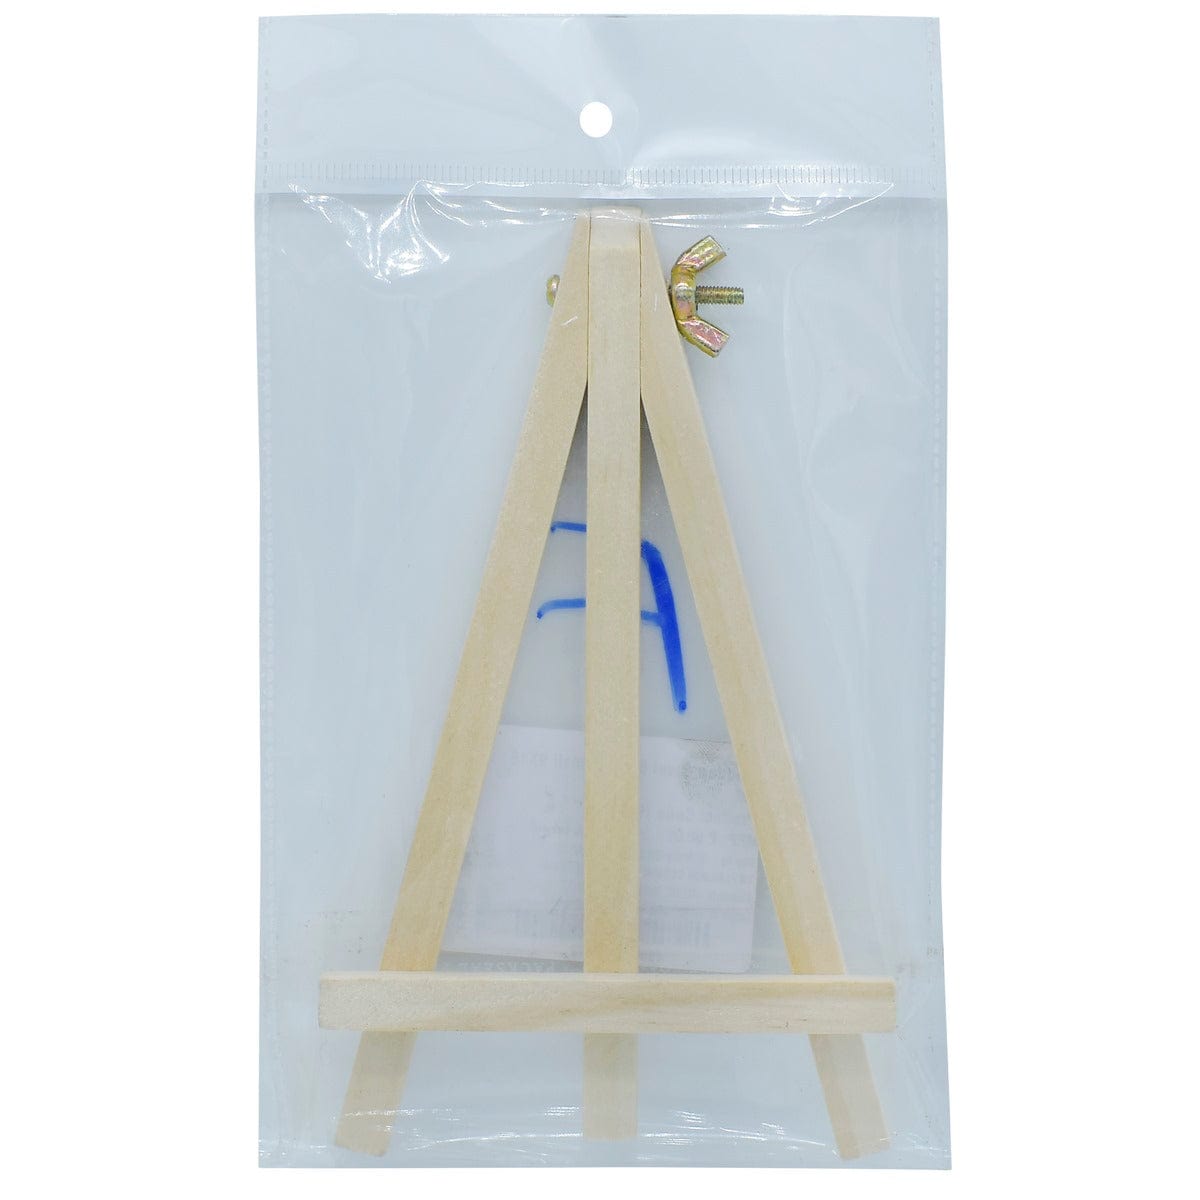 jags-mumbai Easel Wooden Easel 6 Inch Small